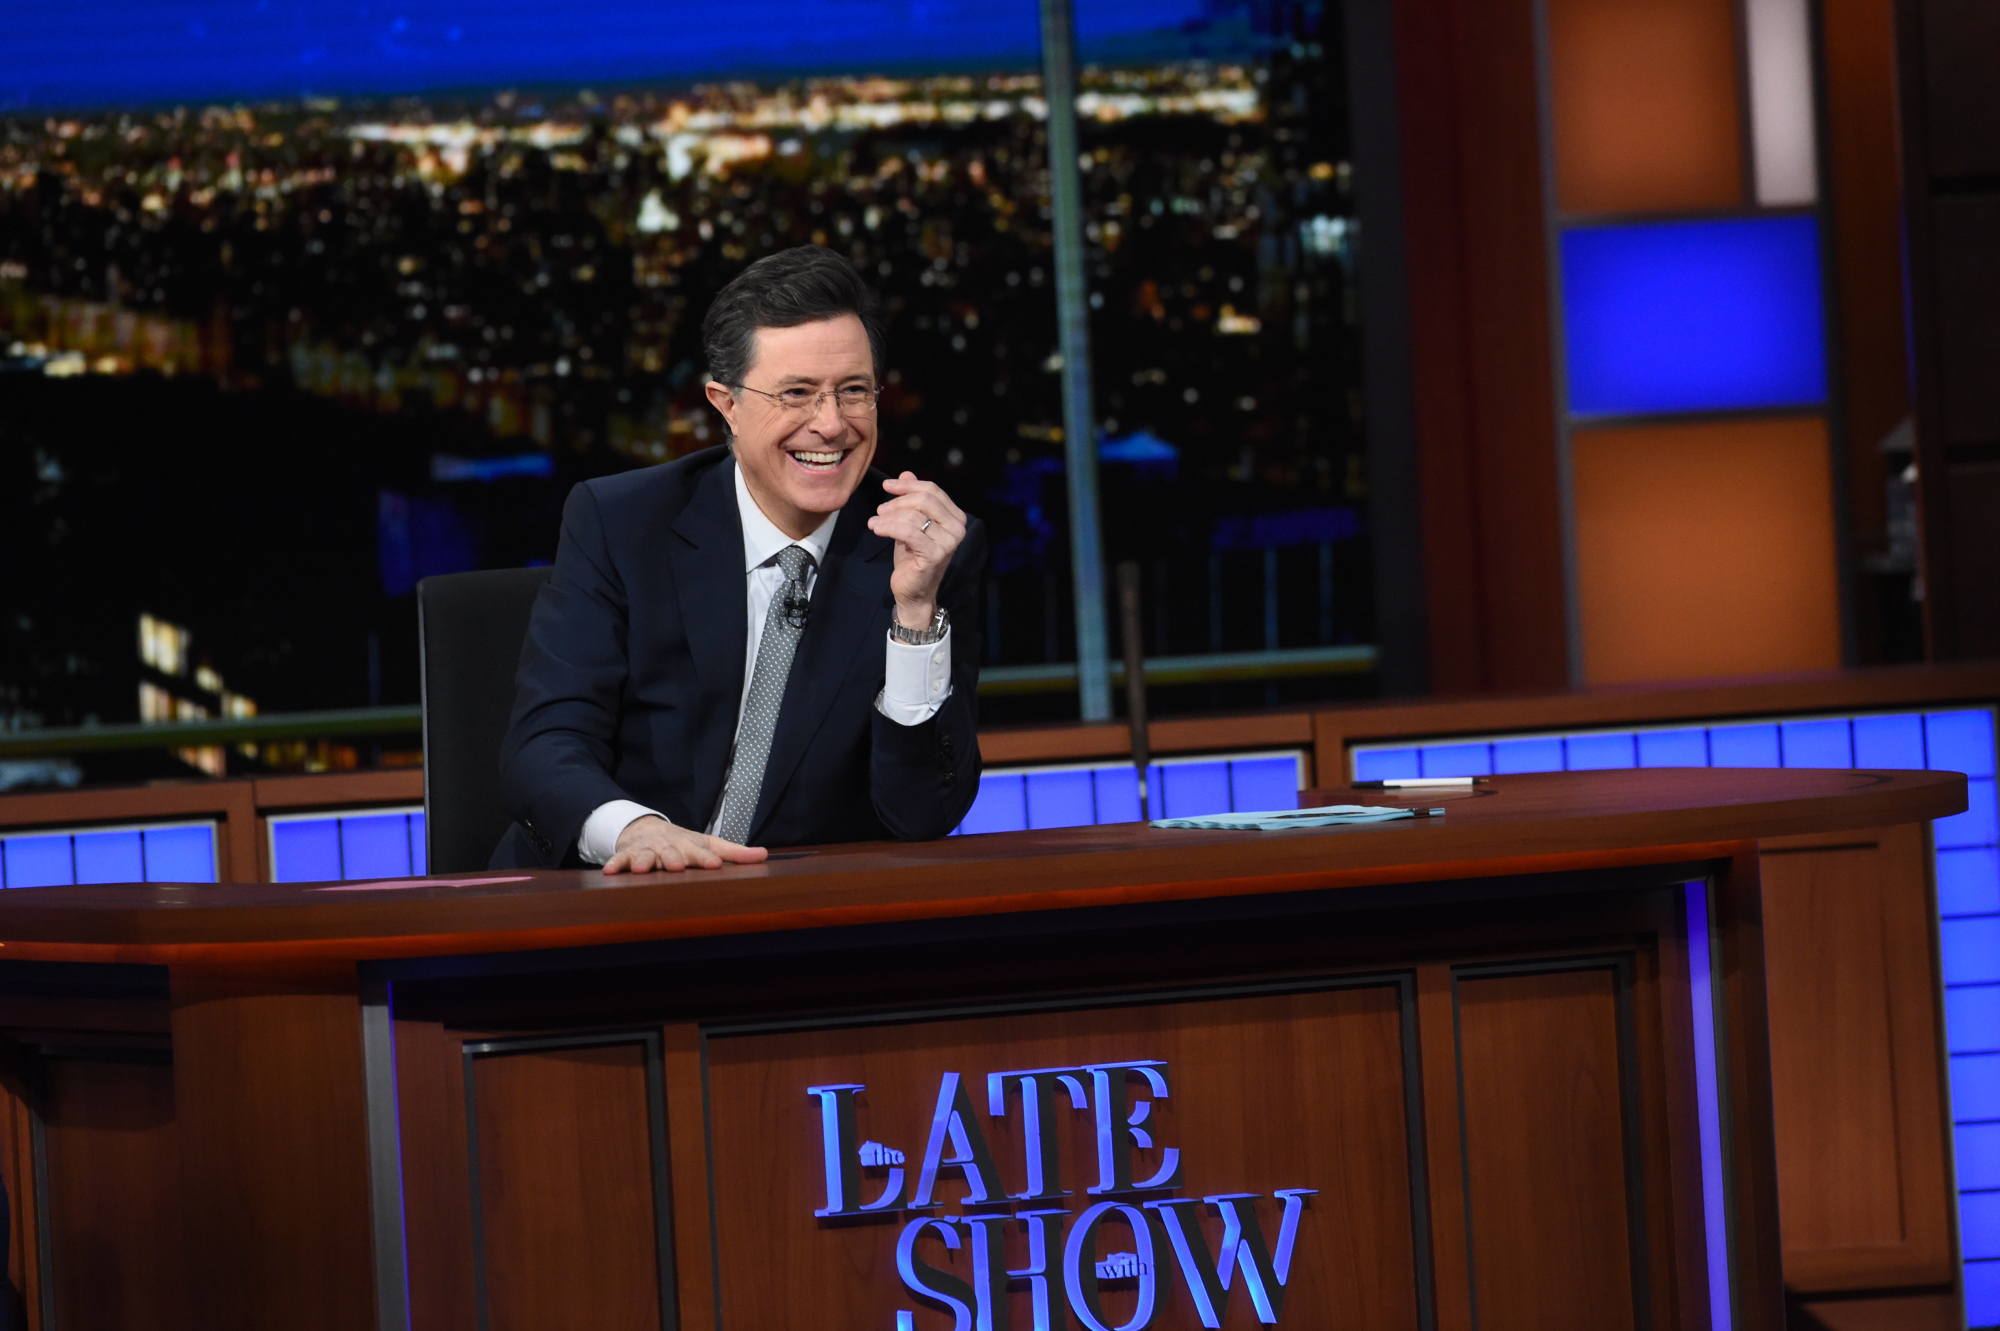 Stephen Colbert on The Late Show, Feb. 7, 2016 on the CBS Television Network. (Heather Wines—CBS/Getty Images)